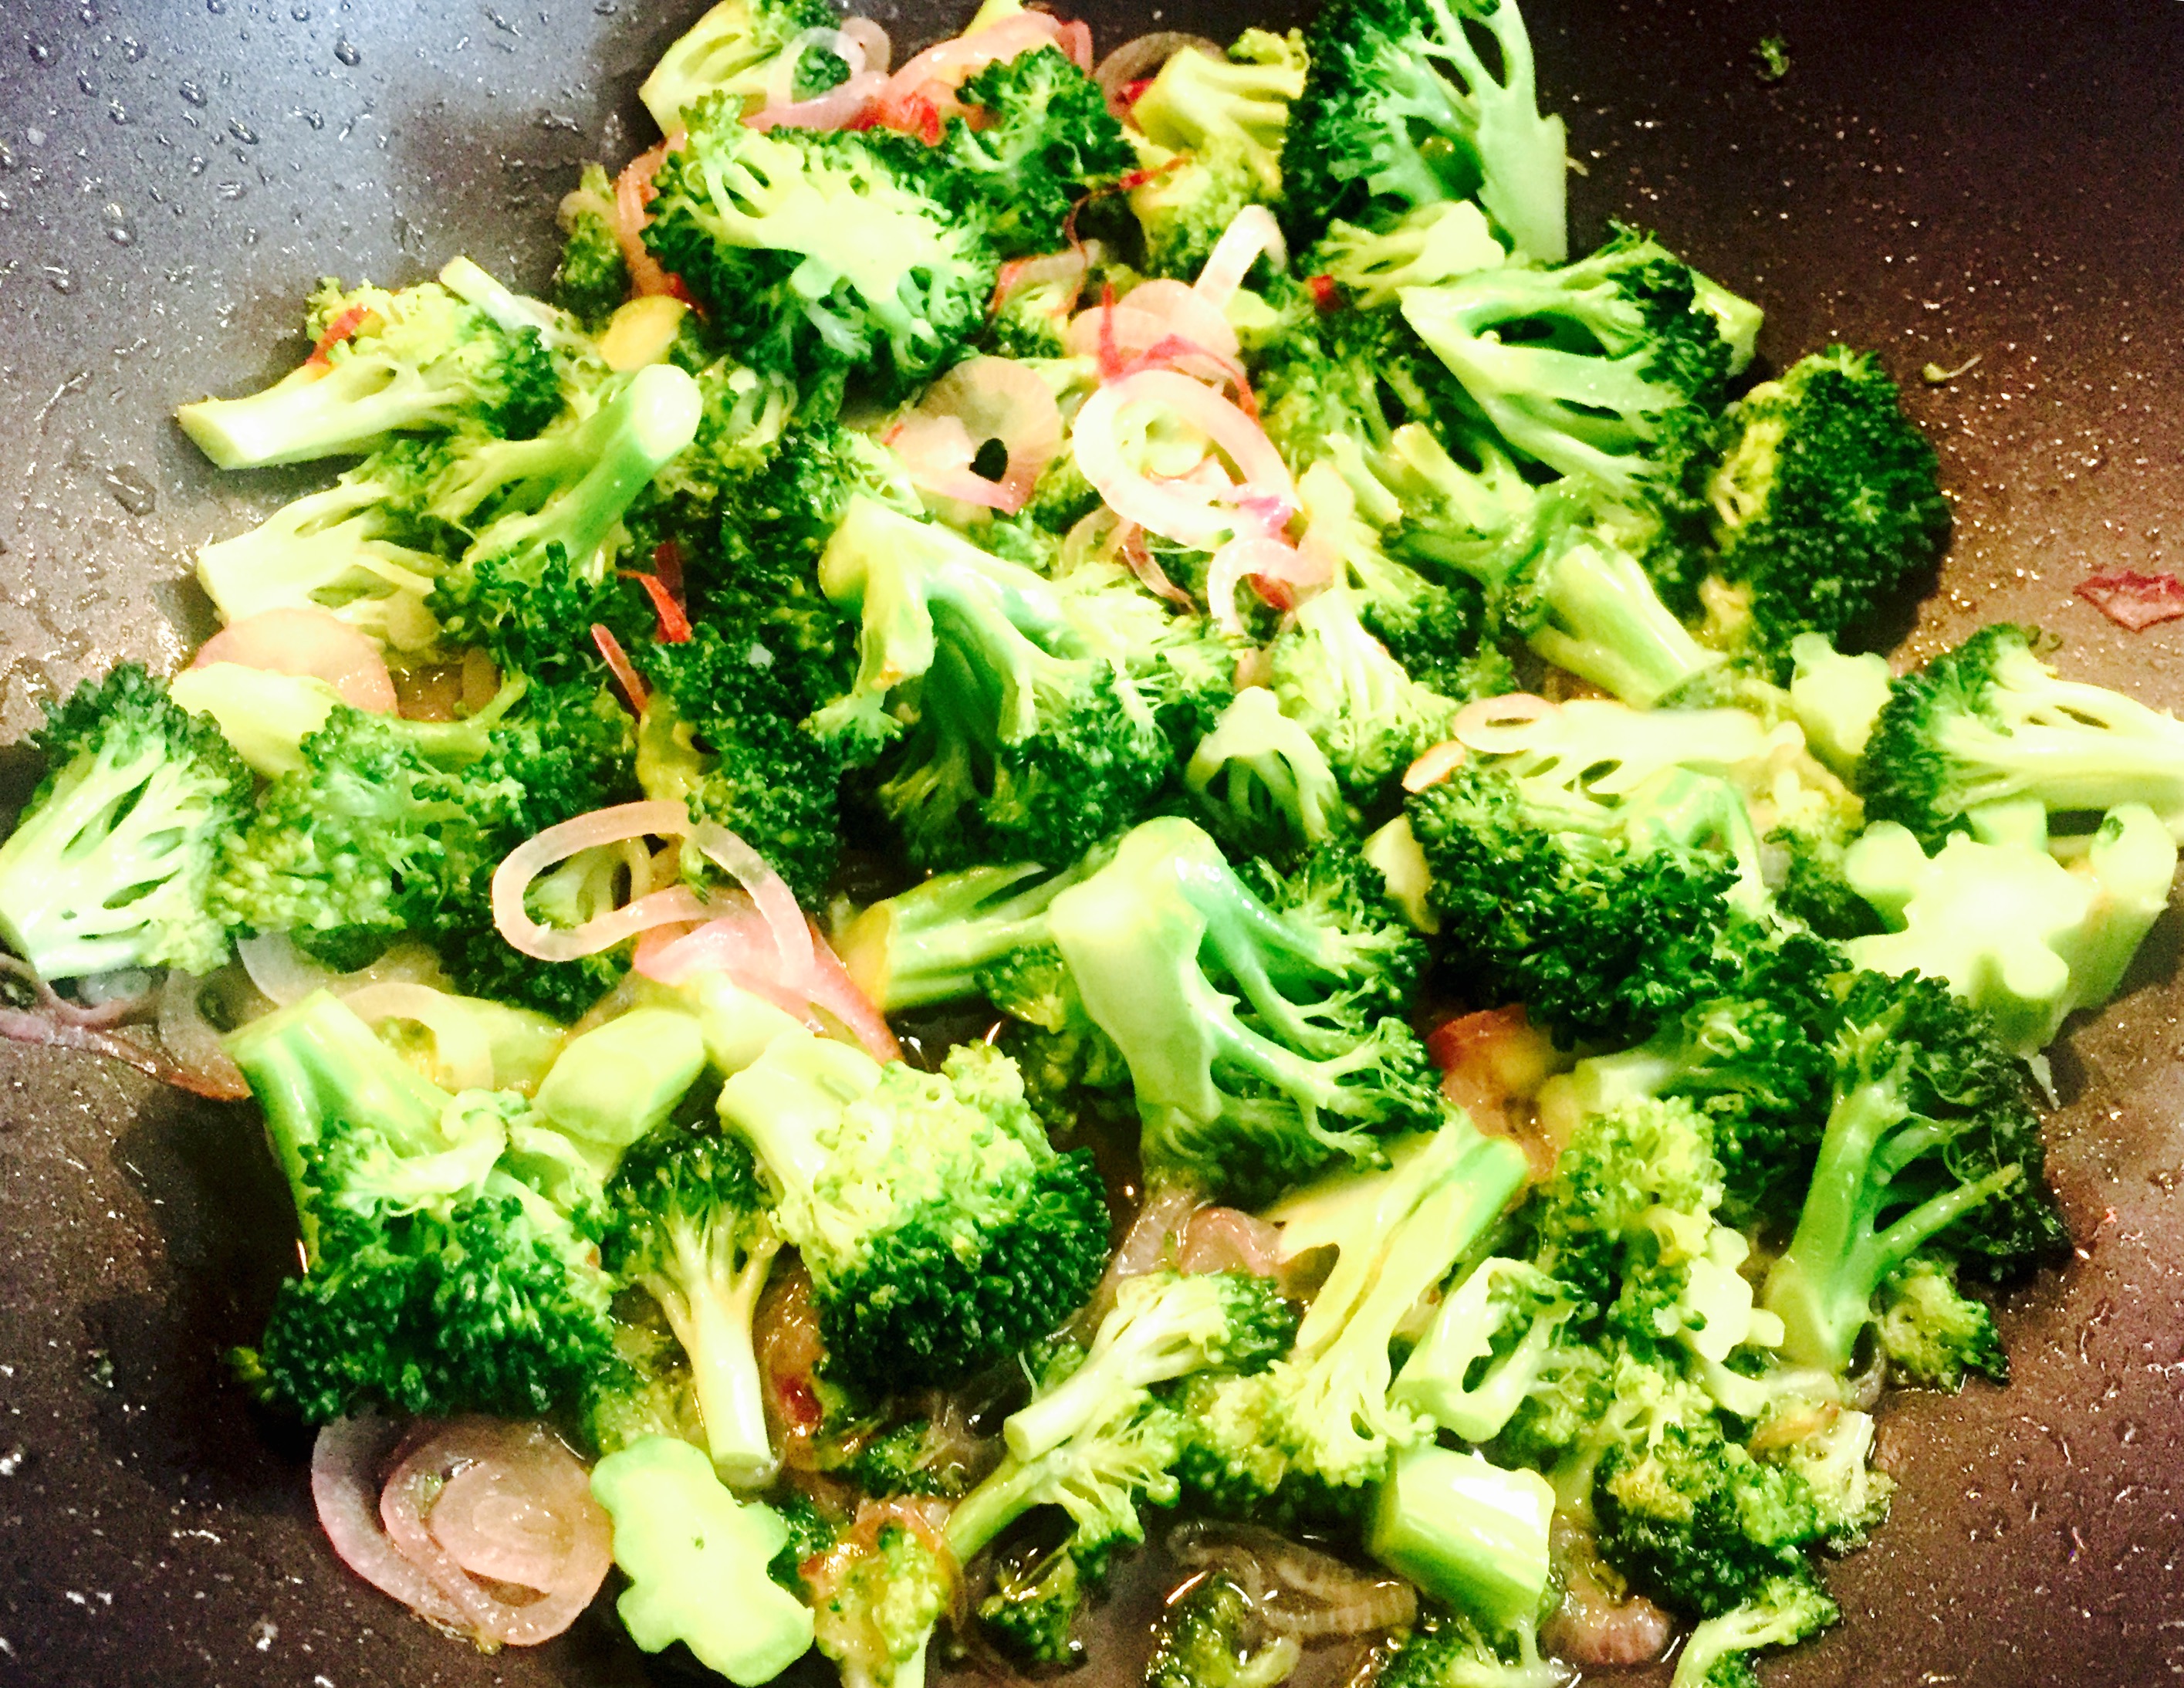 Who can resist sautéed broccoli with thinly sliced shallots!